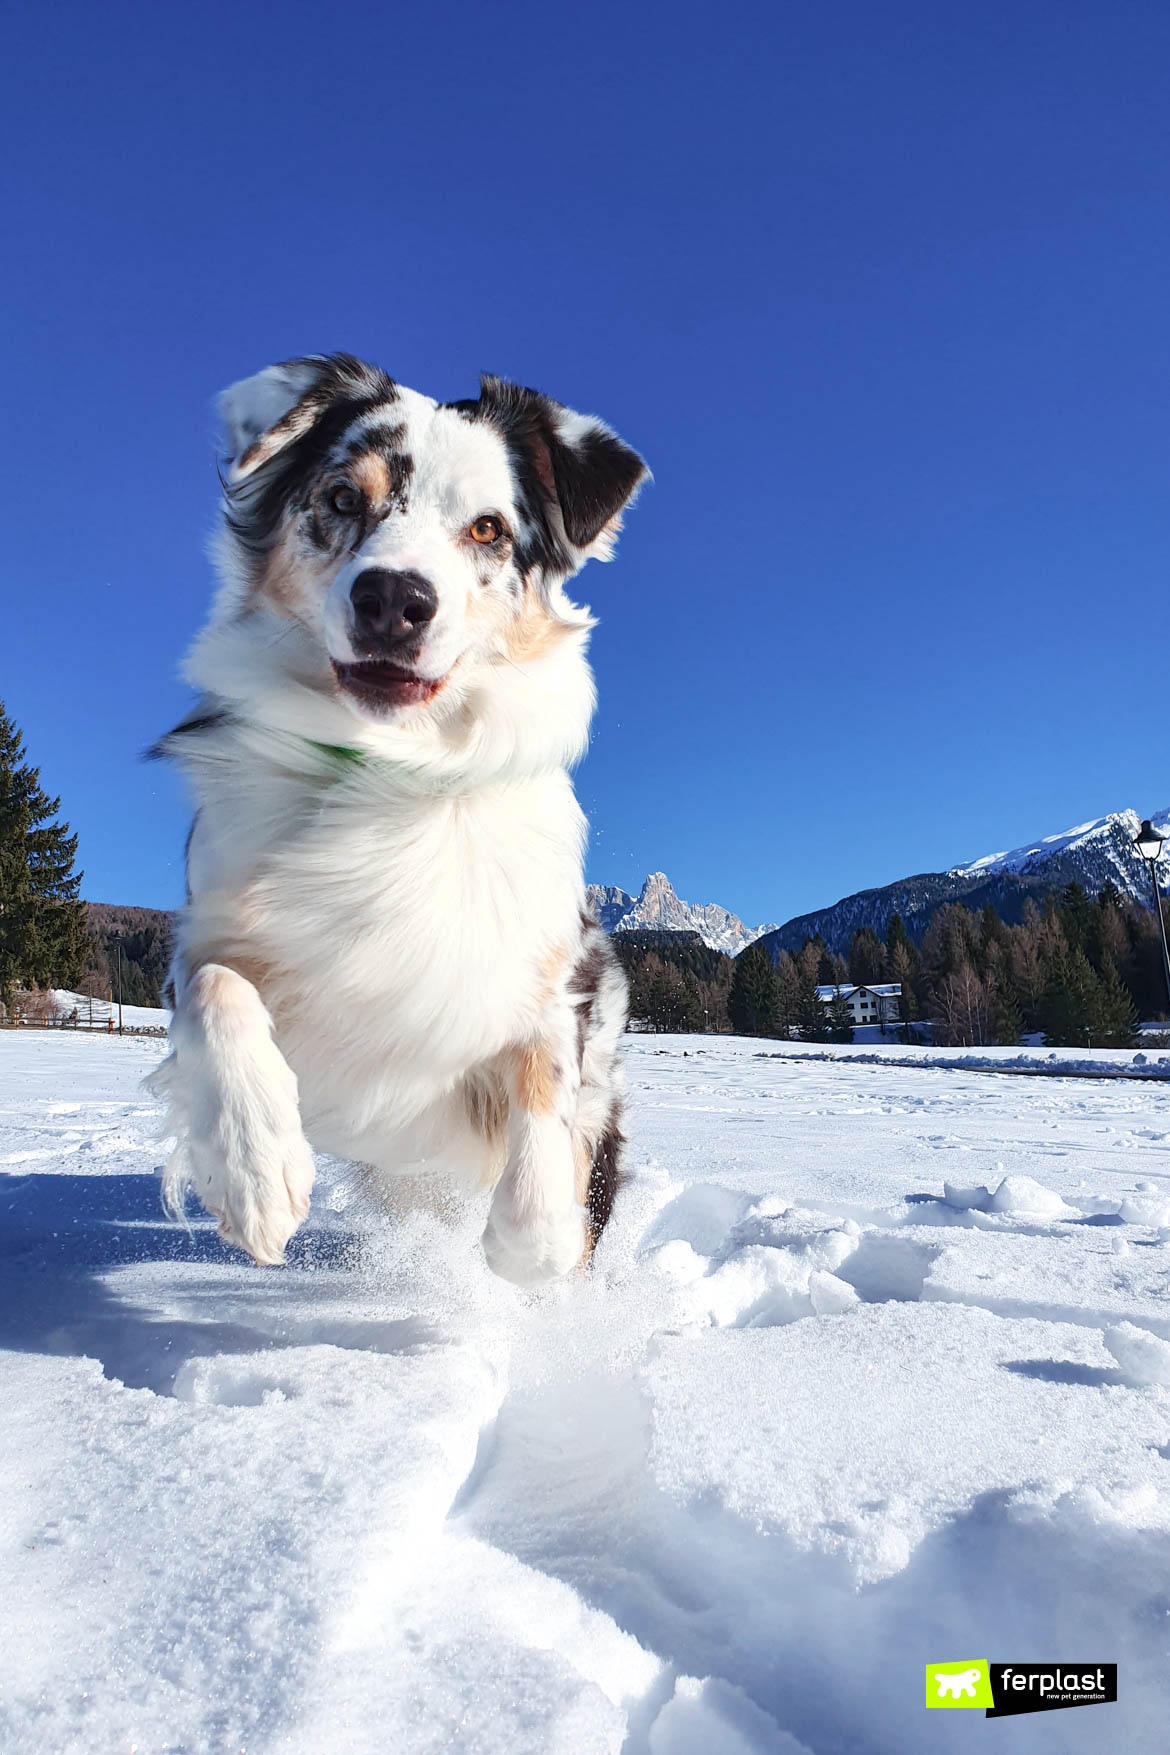 Winter Games for Dogs to Play